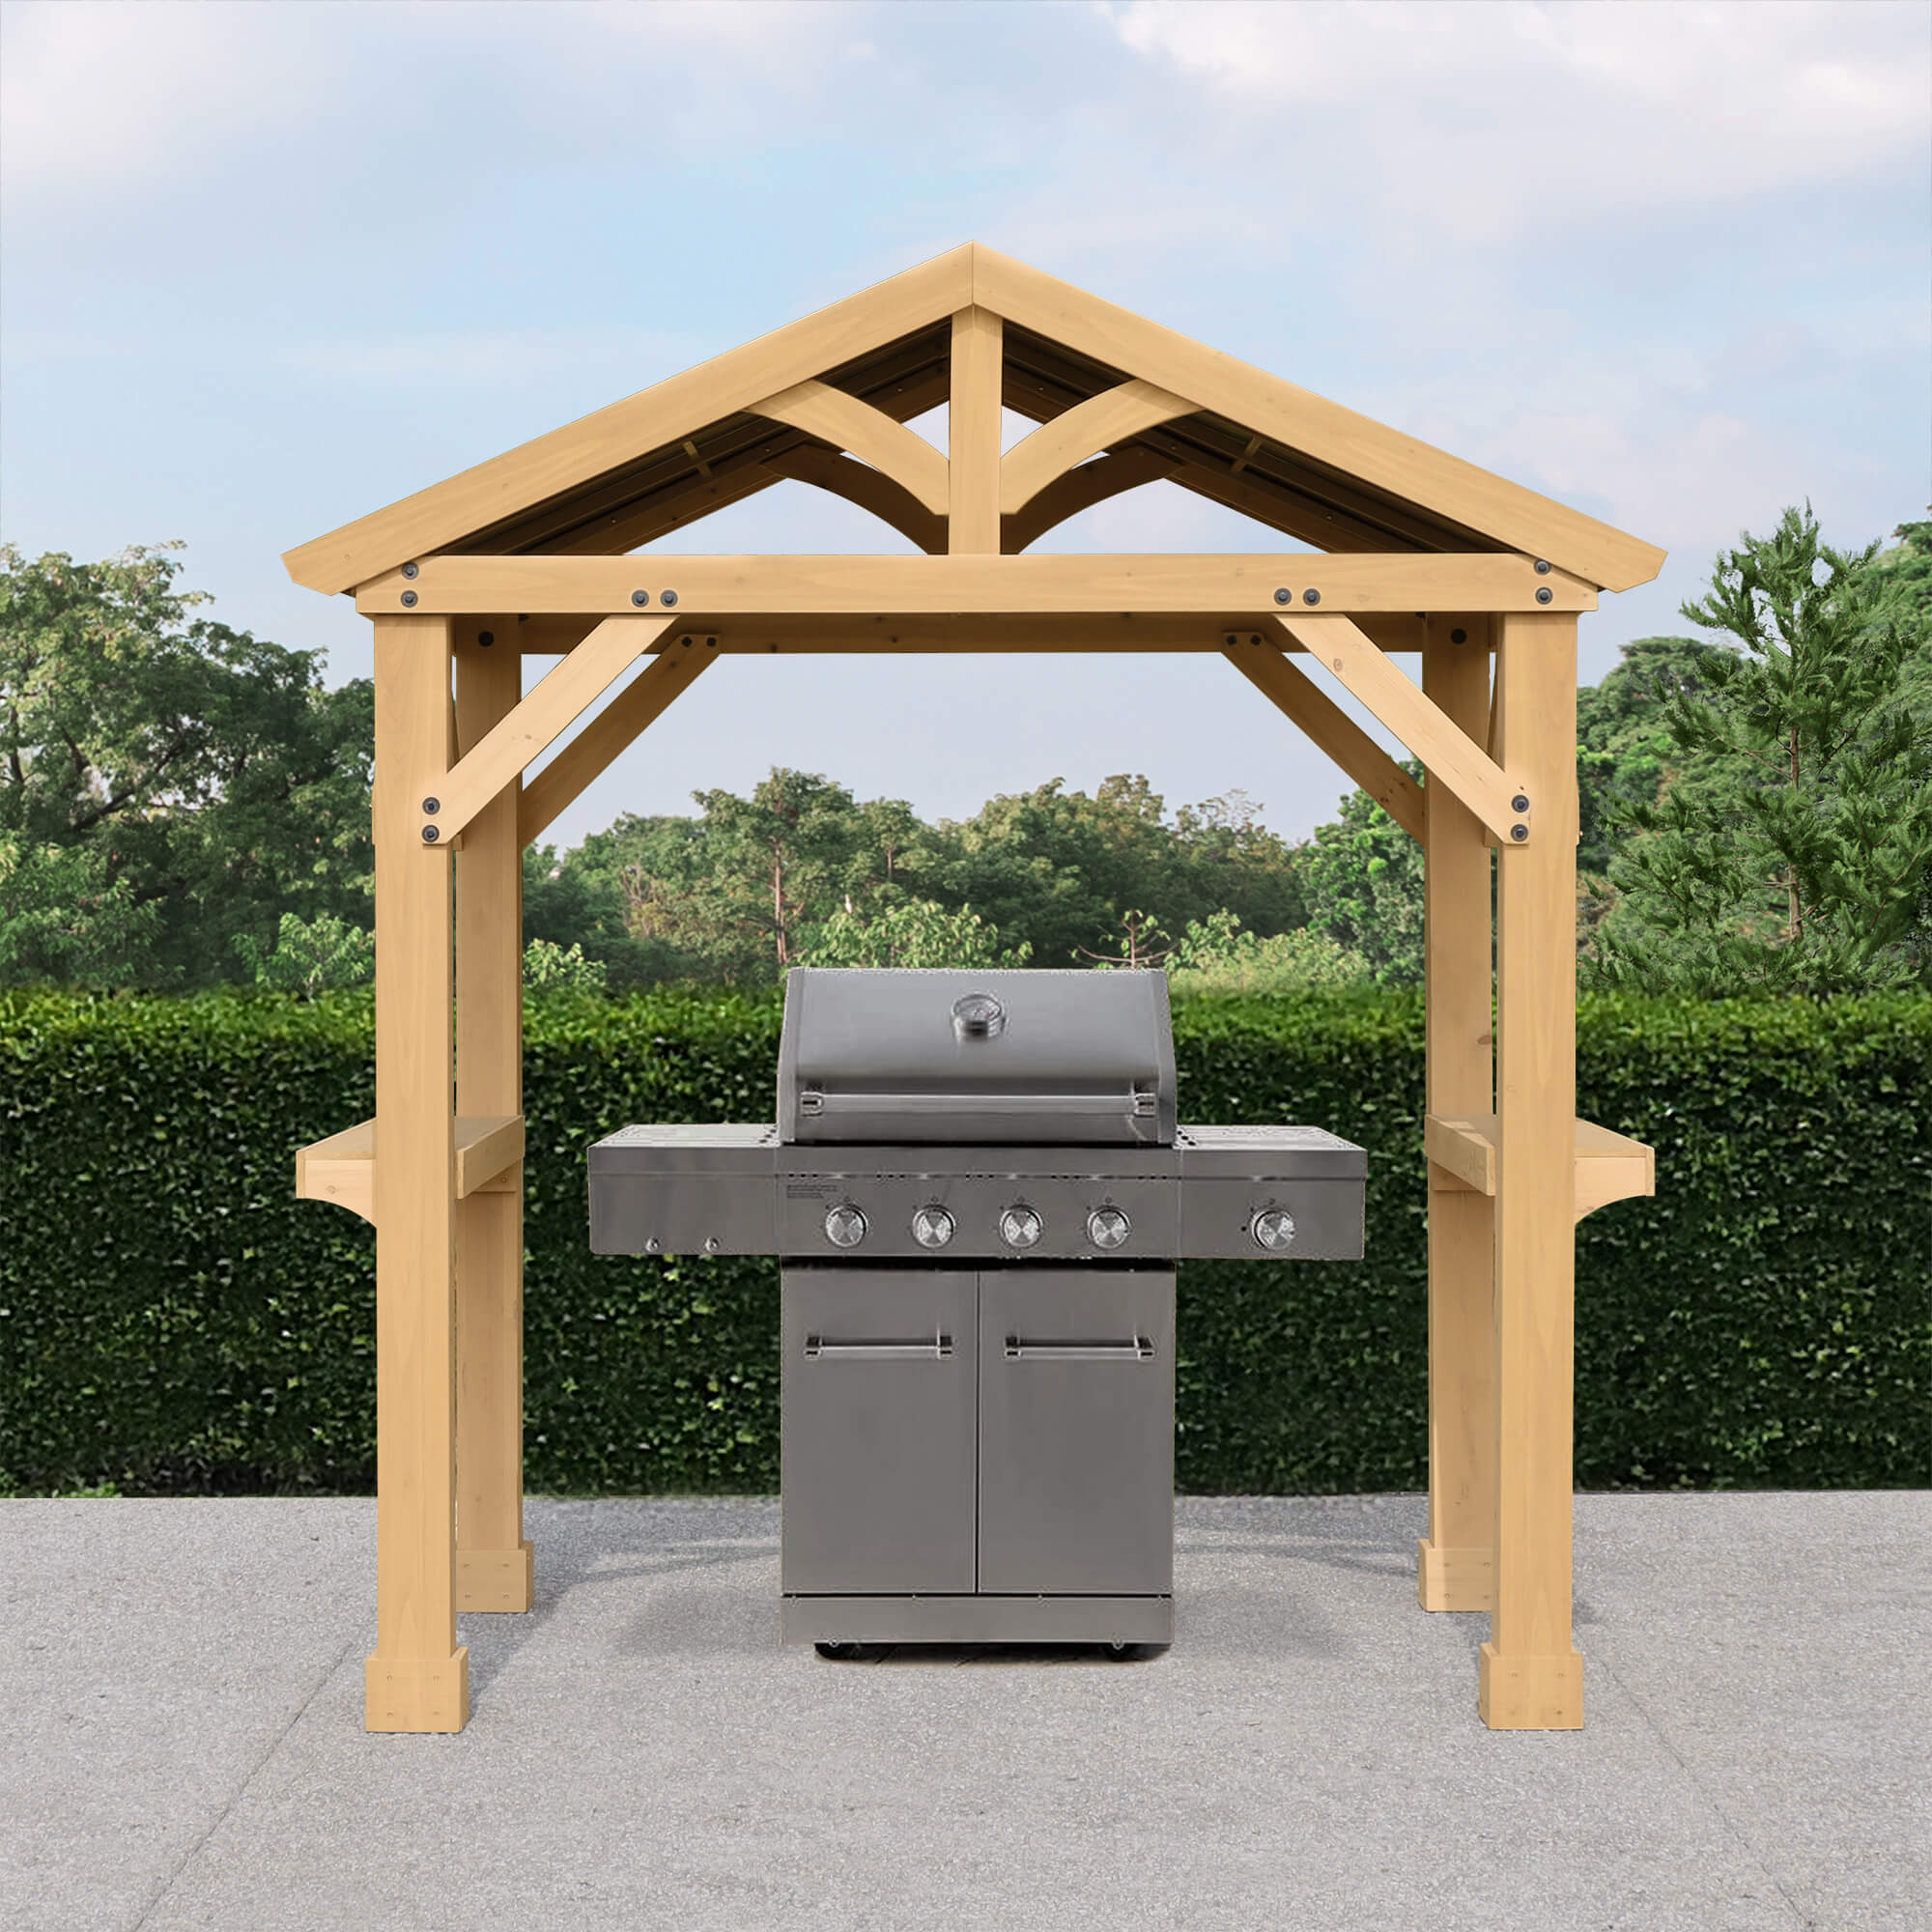 Yardistry Meridian Cedar Grilling Pavilion featuring a robust wooden structure designed to shelter a barbecue grill, set against a backdrop of lush greenery.